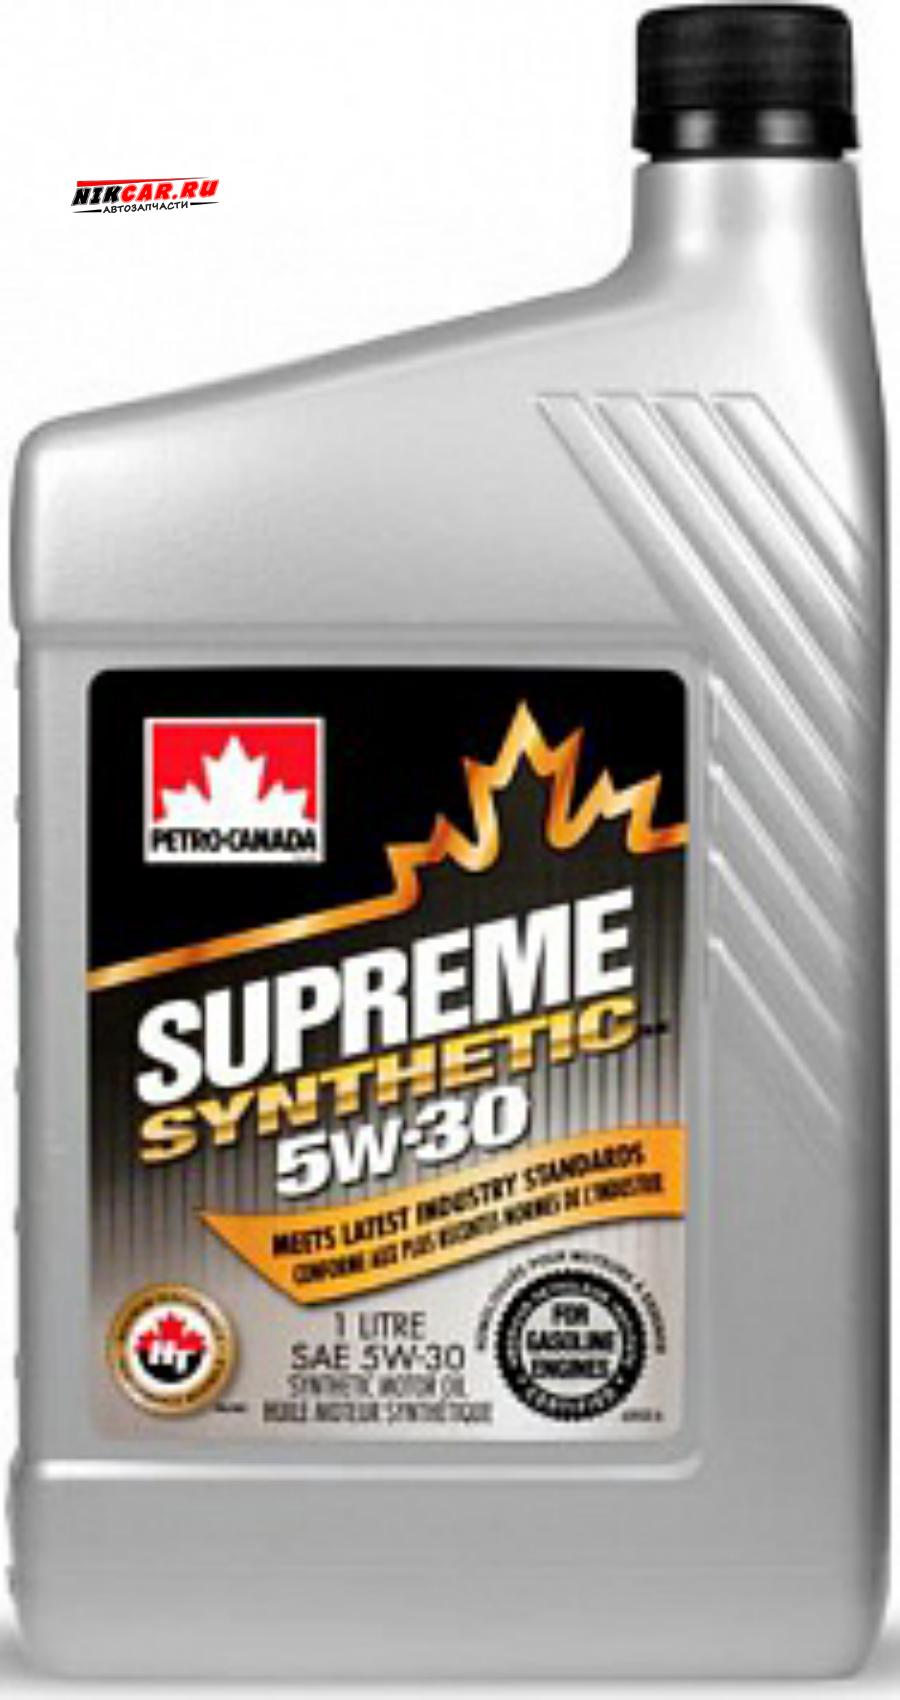 MOSYN53C12 PETRO-CANADA Масло моторное синтетическое Supreme Synthetic 5W-30, 1л